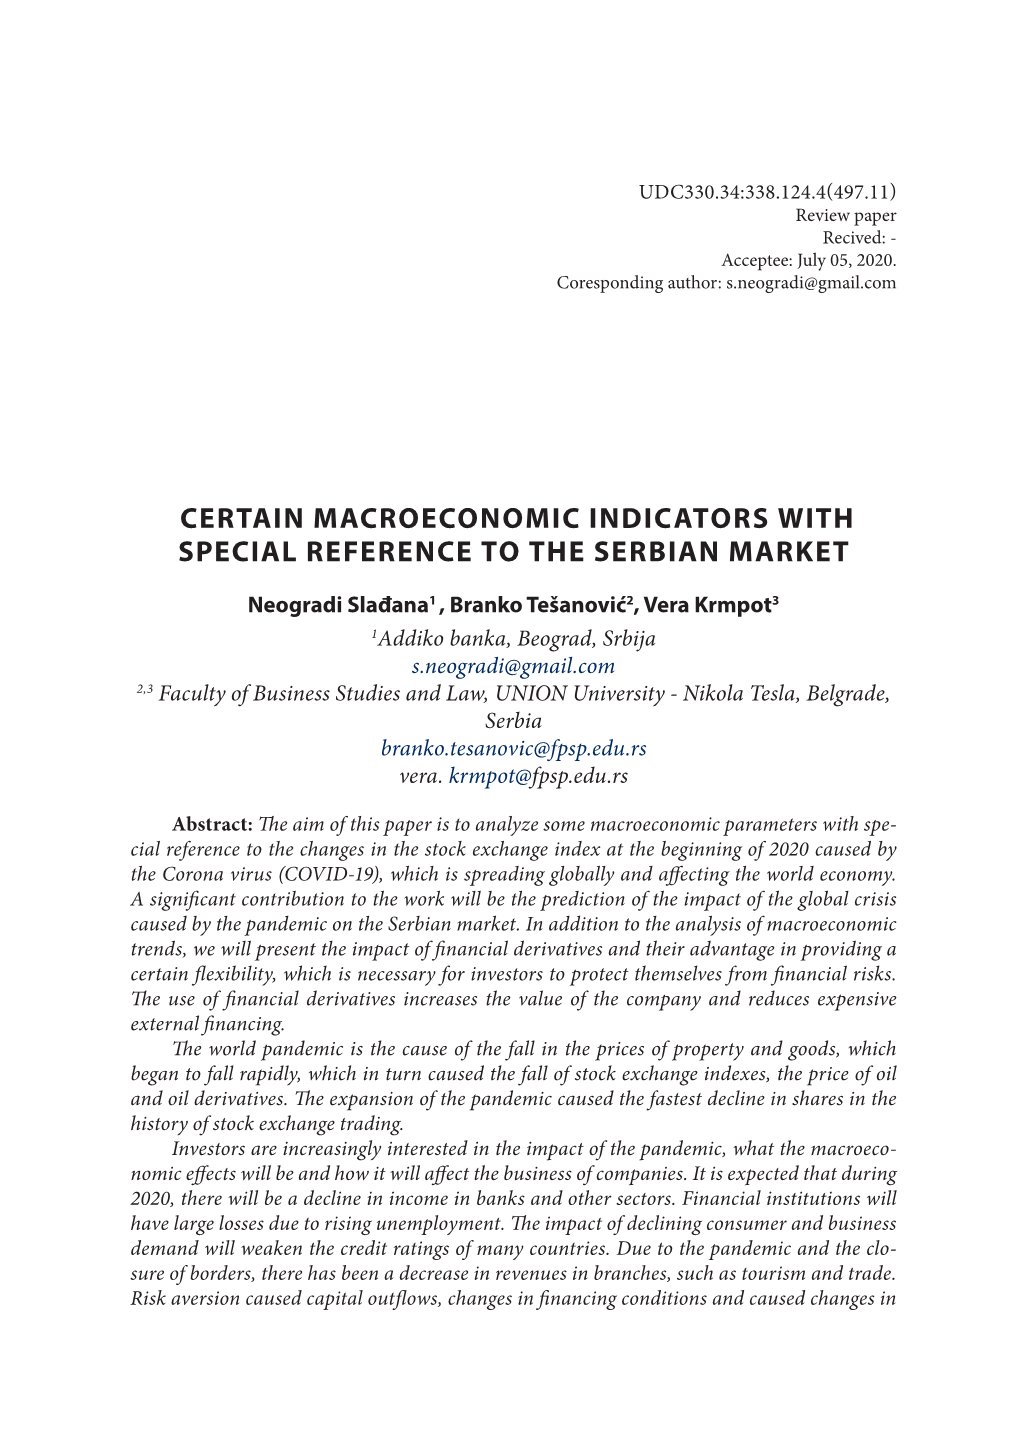 Certain Macroeconomic Indicators with Special Reference to the Serbian Market